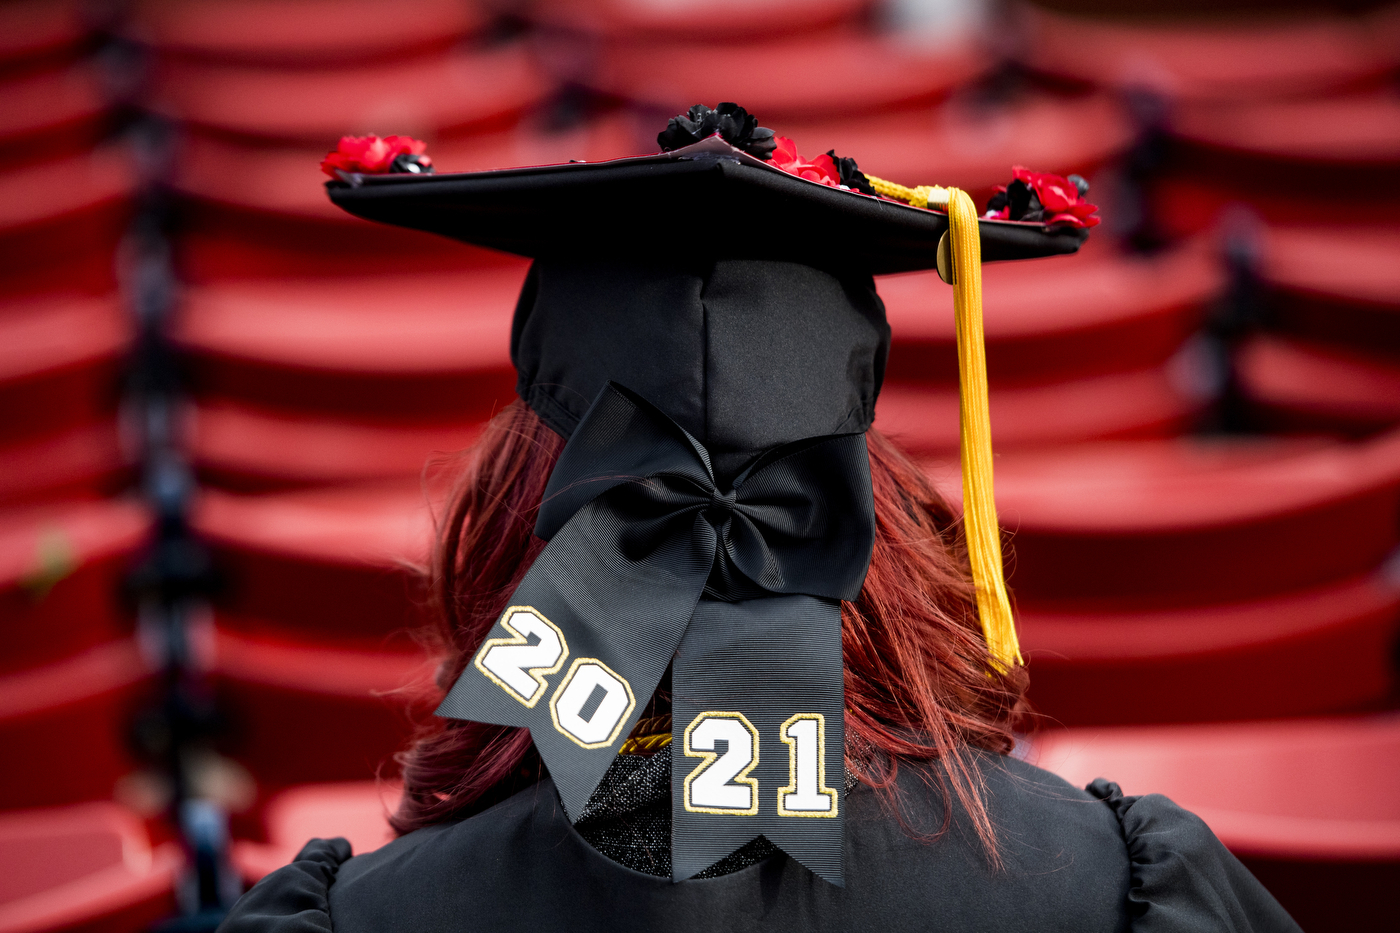 Commencement in pictures shows graduates embracing the joy of an in